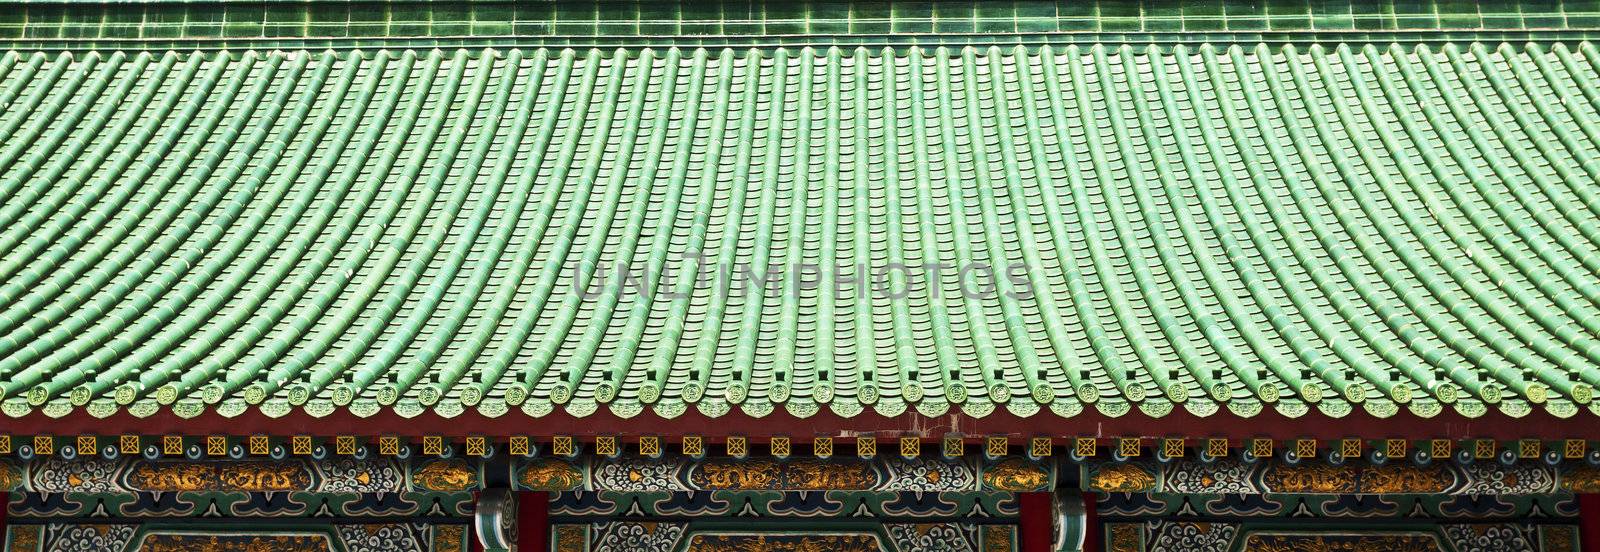 Temple roof pattern